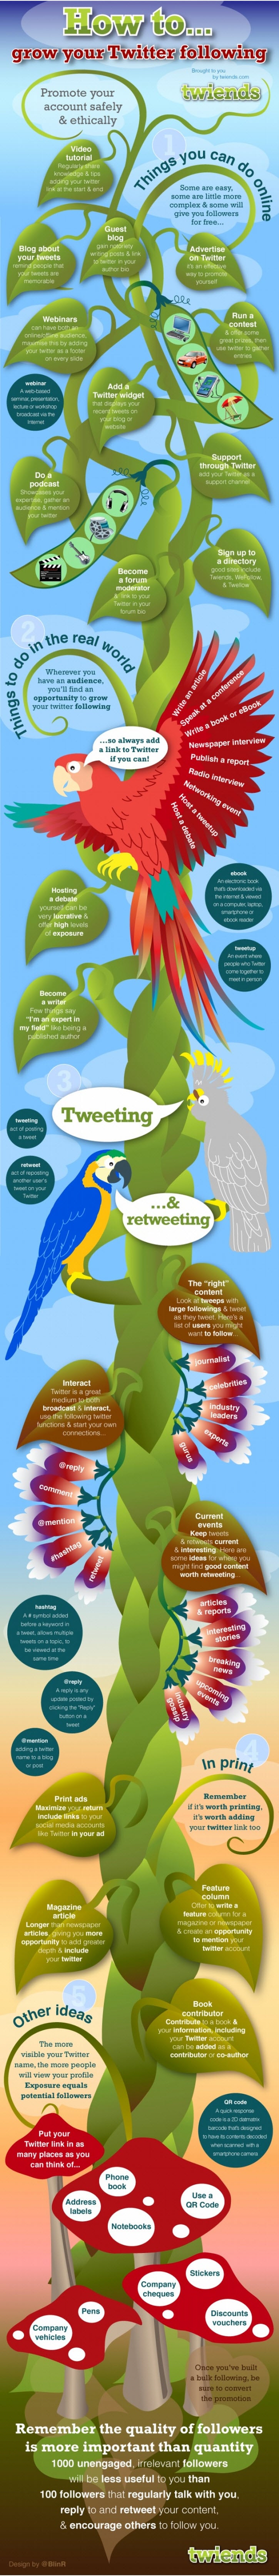 40 Legit Ways To Increase Your Twitter Followers [Infographic]